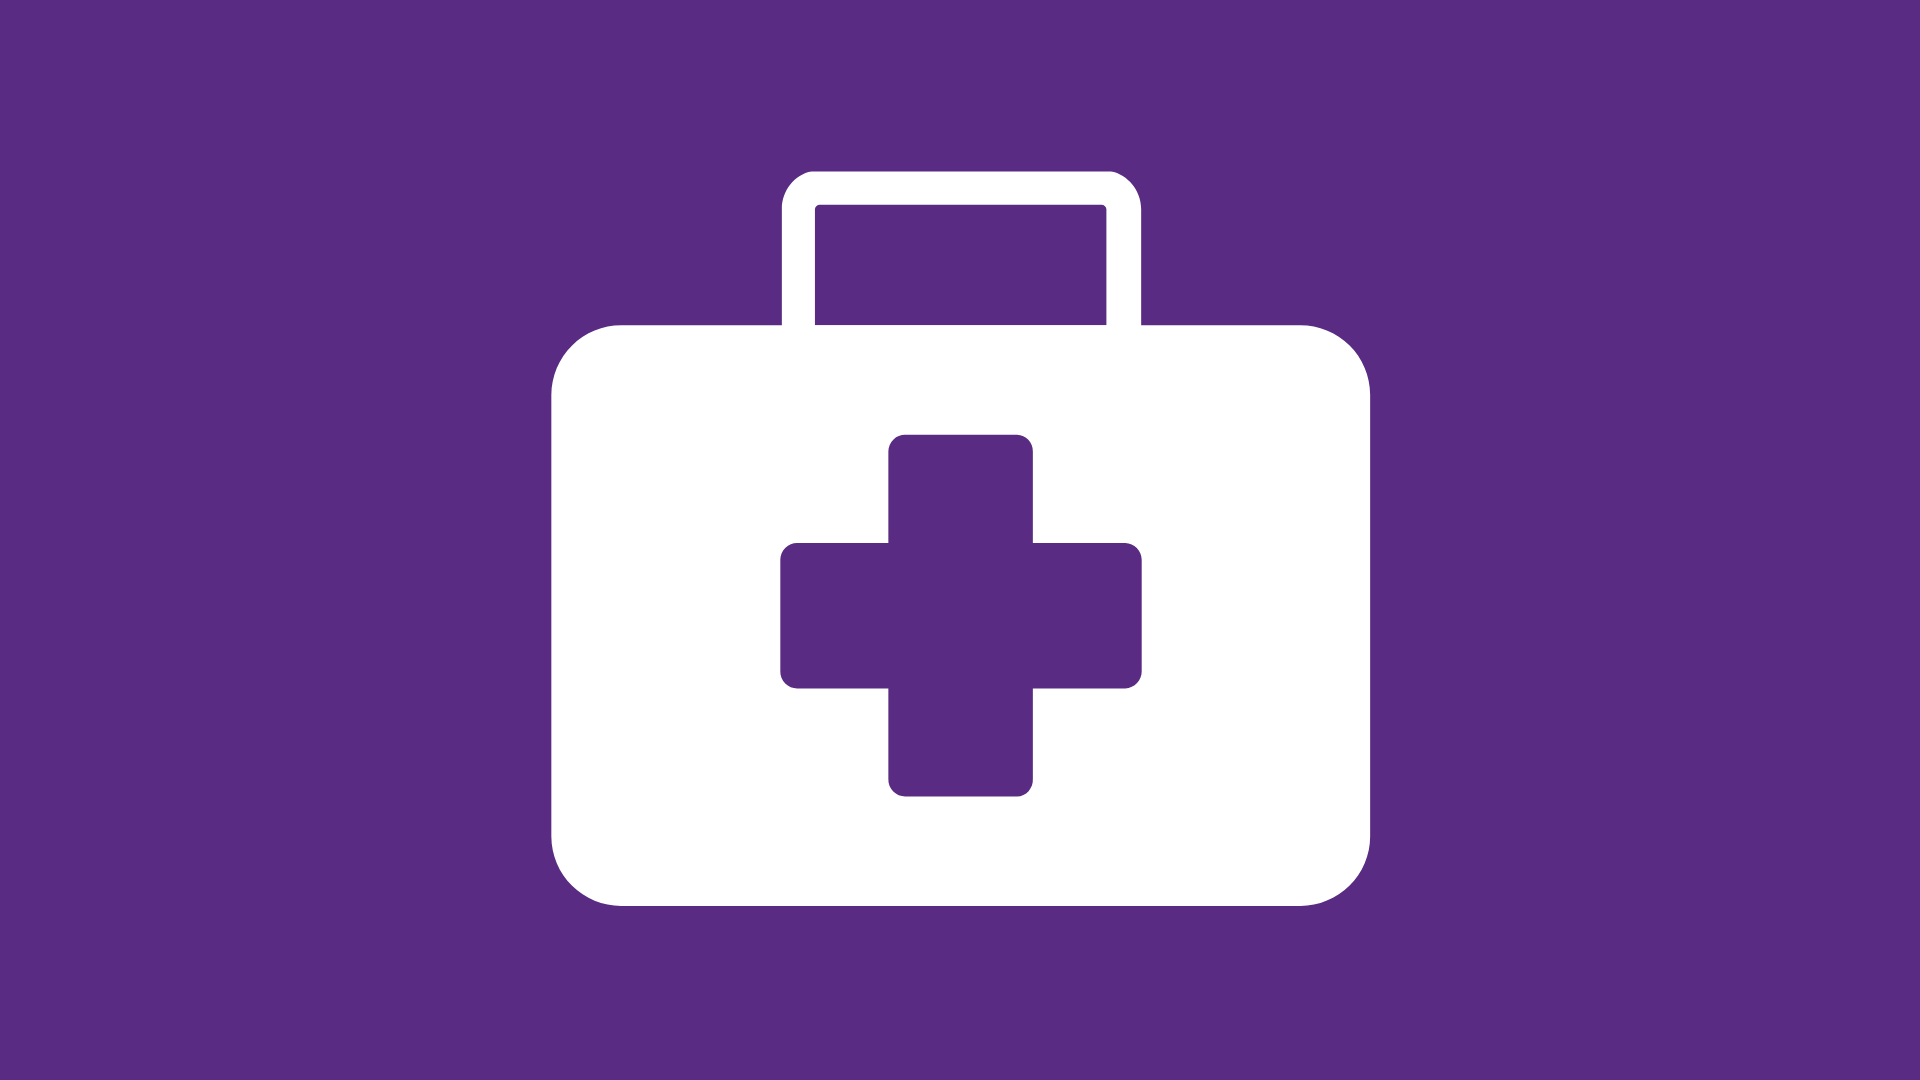 https://dbqfoundation.org/pdf/resources/Equity_Profile_Health_Icon_Purple.png